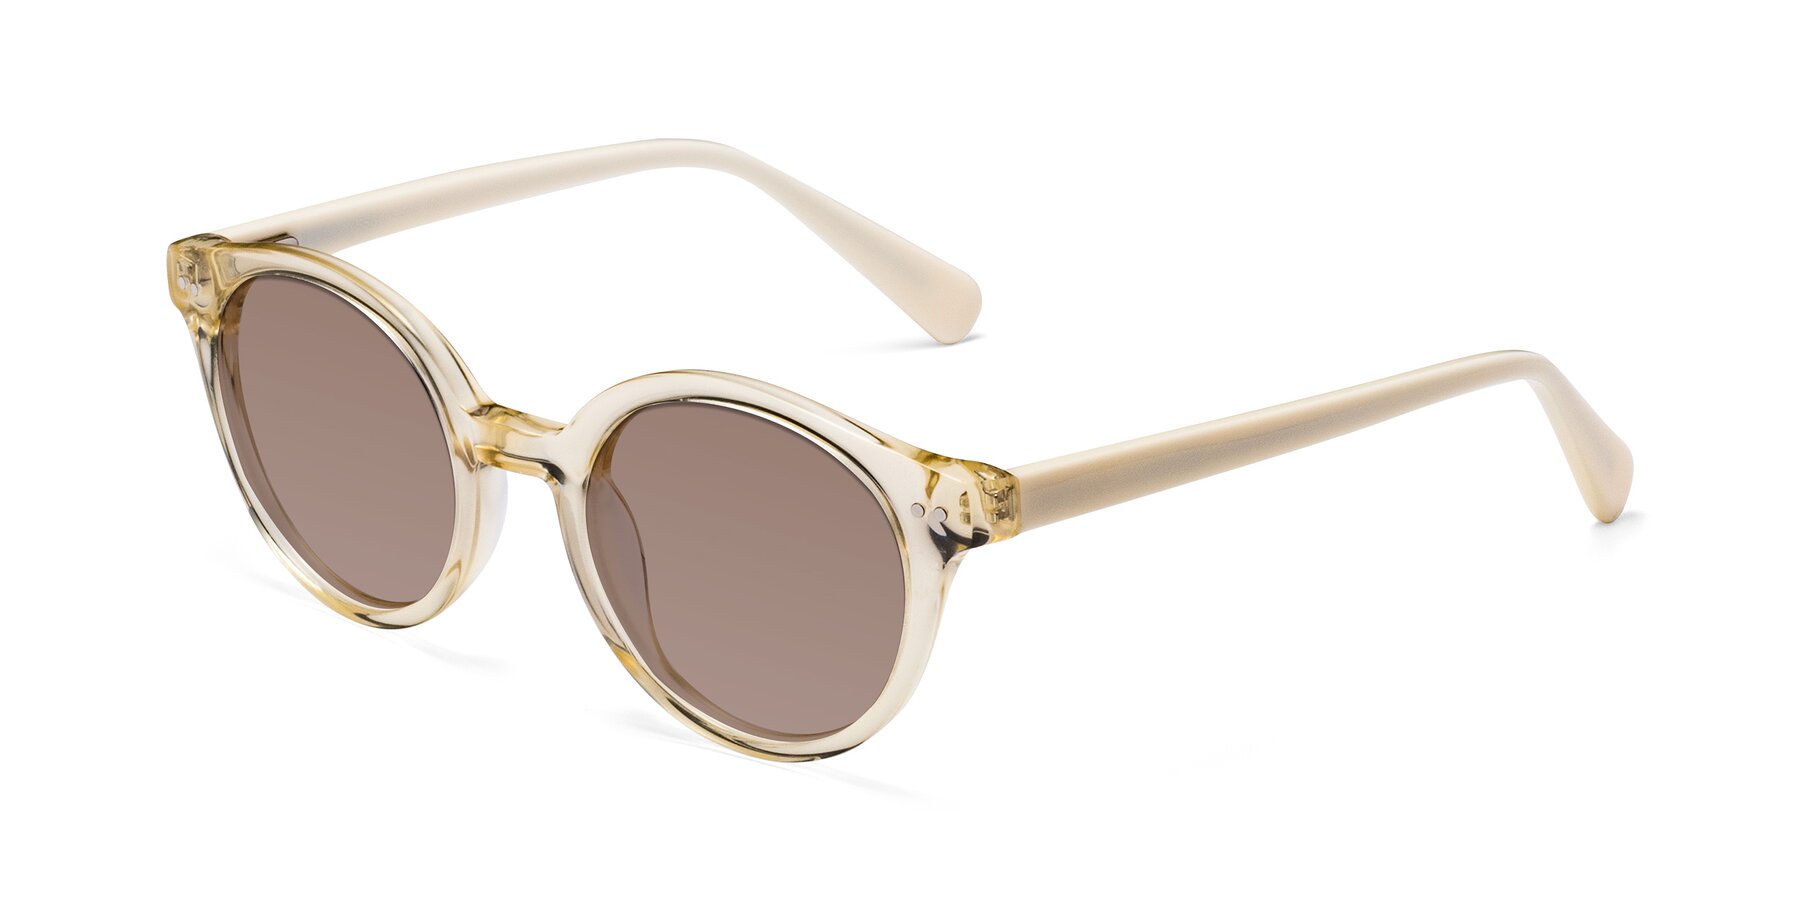 Angle of Bellion in Transparent Beige with Medium Brown Tinted Lenses